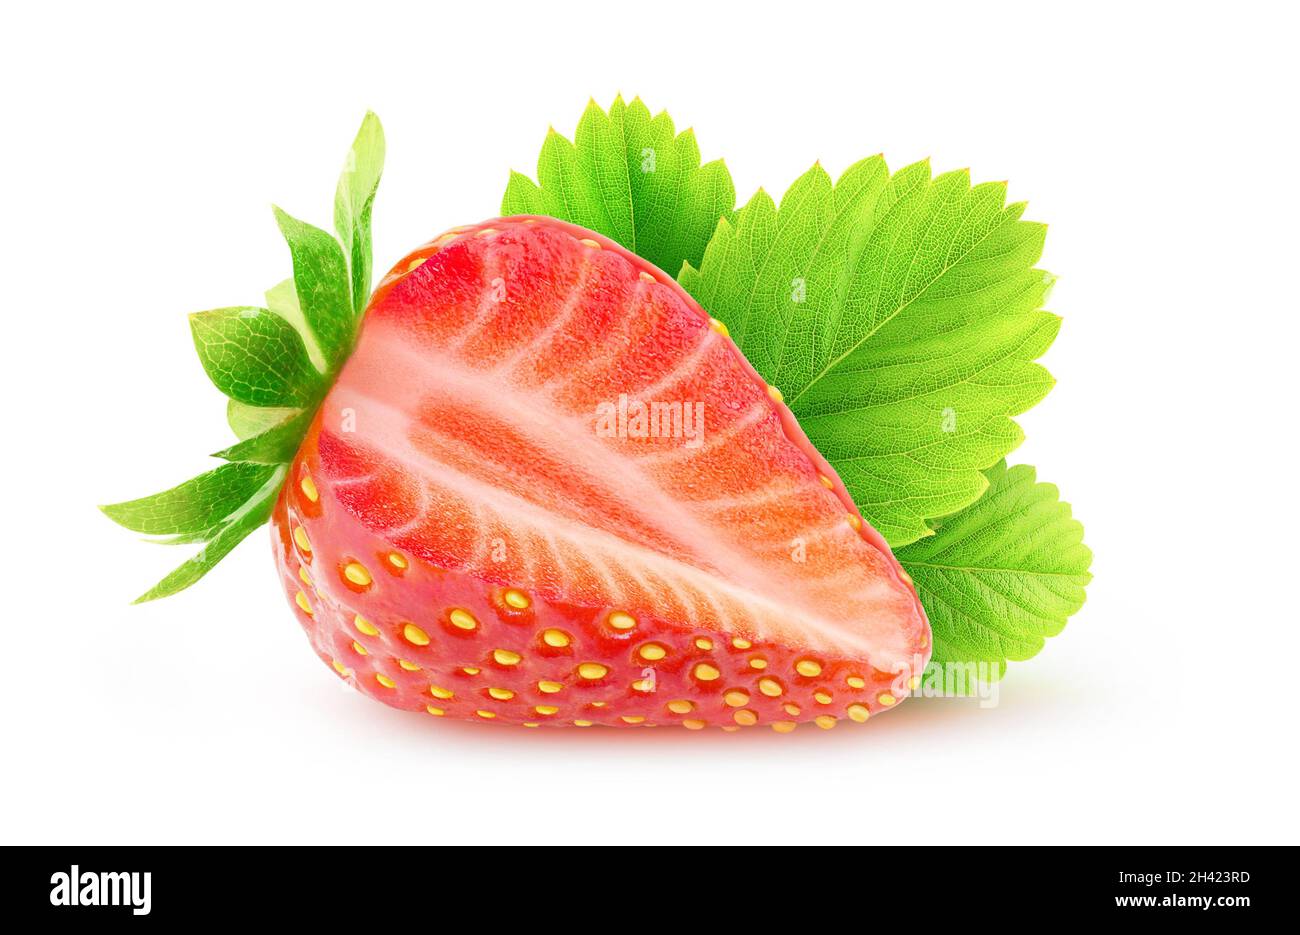 Isolated cut fruit. One fresh strawberry with cut out piece with leaf isolated on white background Stock Photo